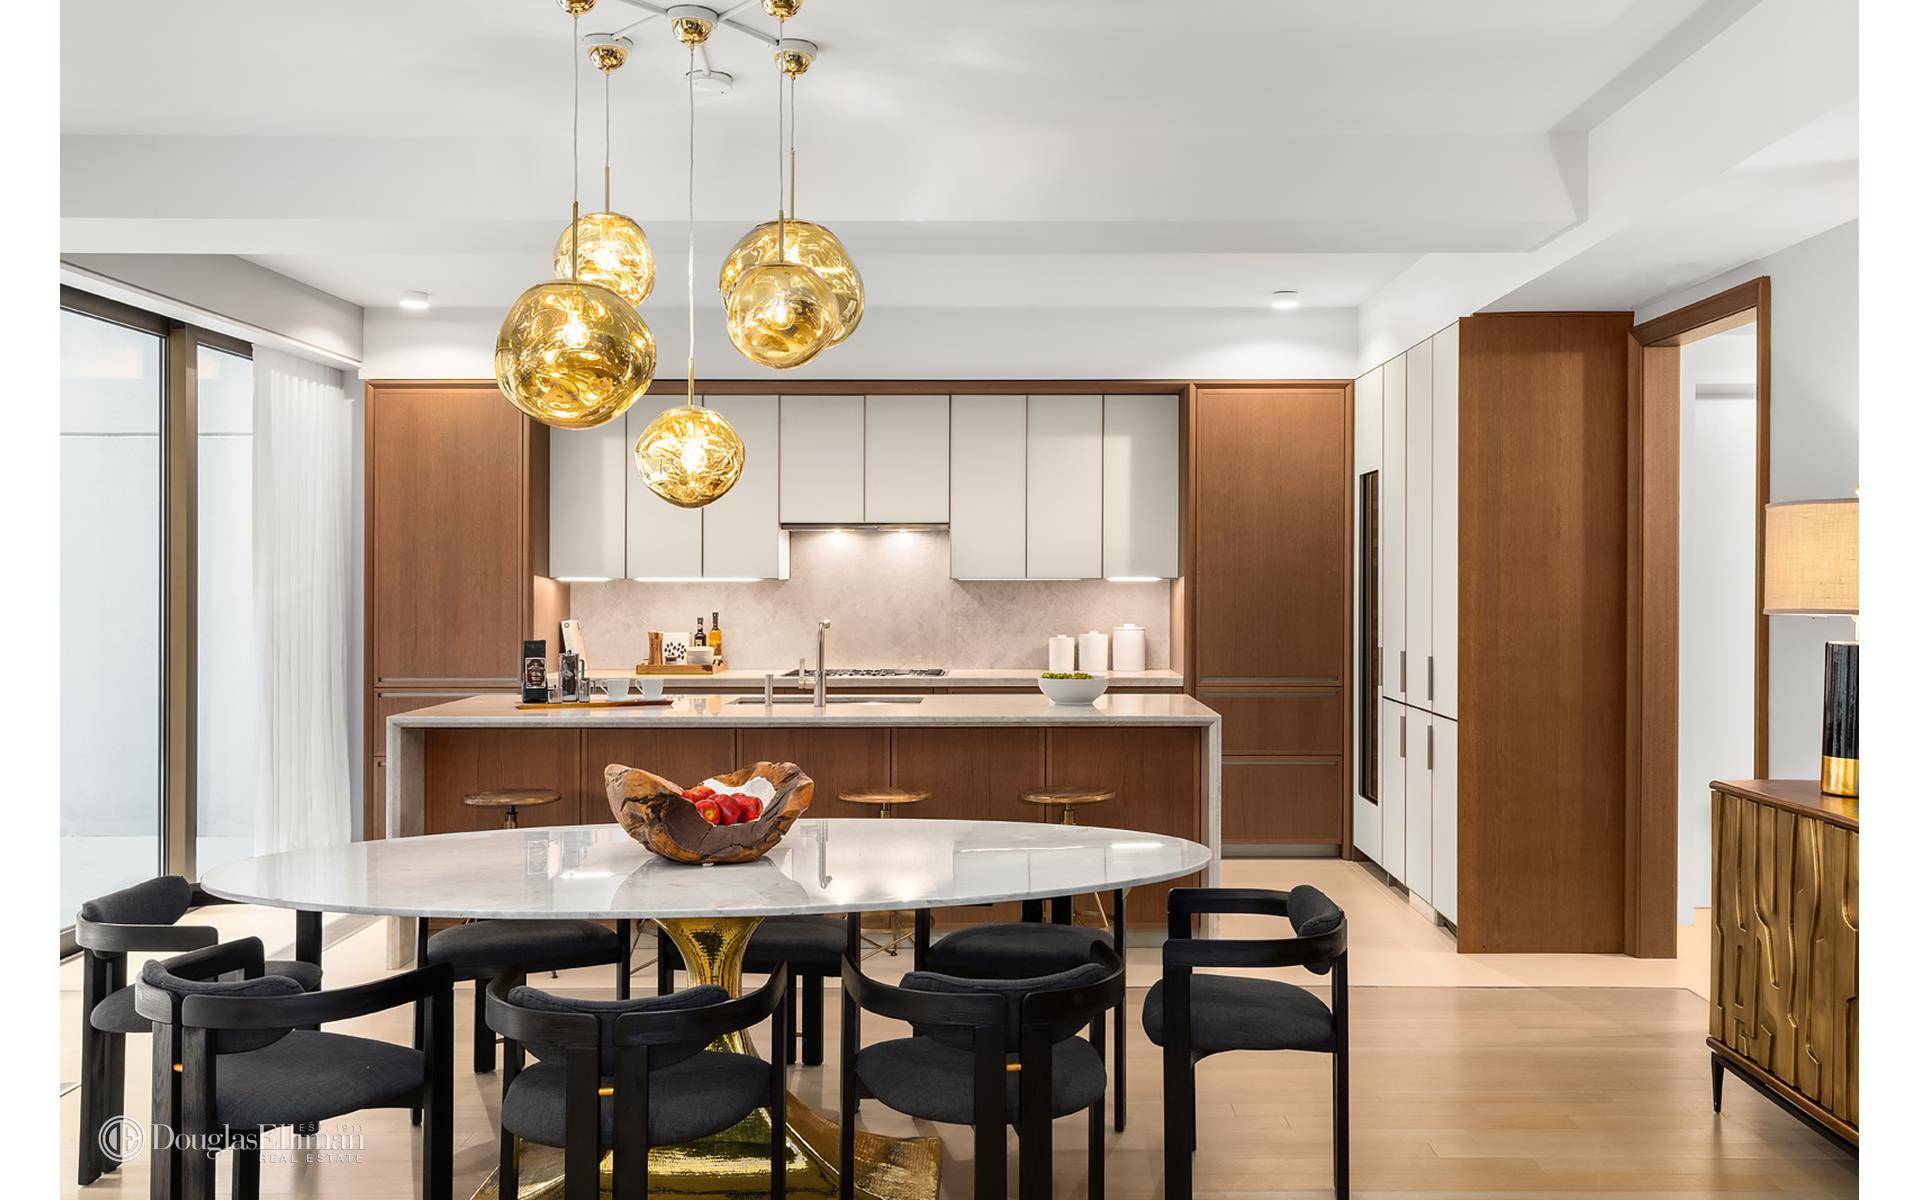 The extraordinary embodiment of sleek, innovative, contemporary design, The Twenty 1 condominium is a brand new boutique residence setting a premium standard of luxury at the crossroads of prime Chelsea ...